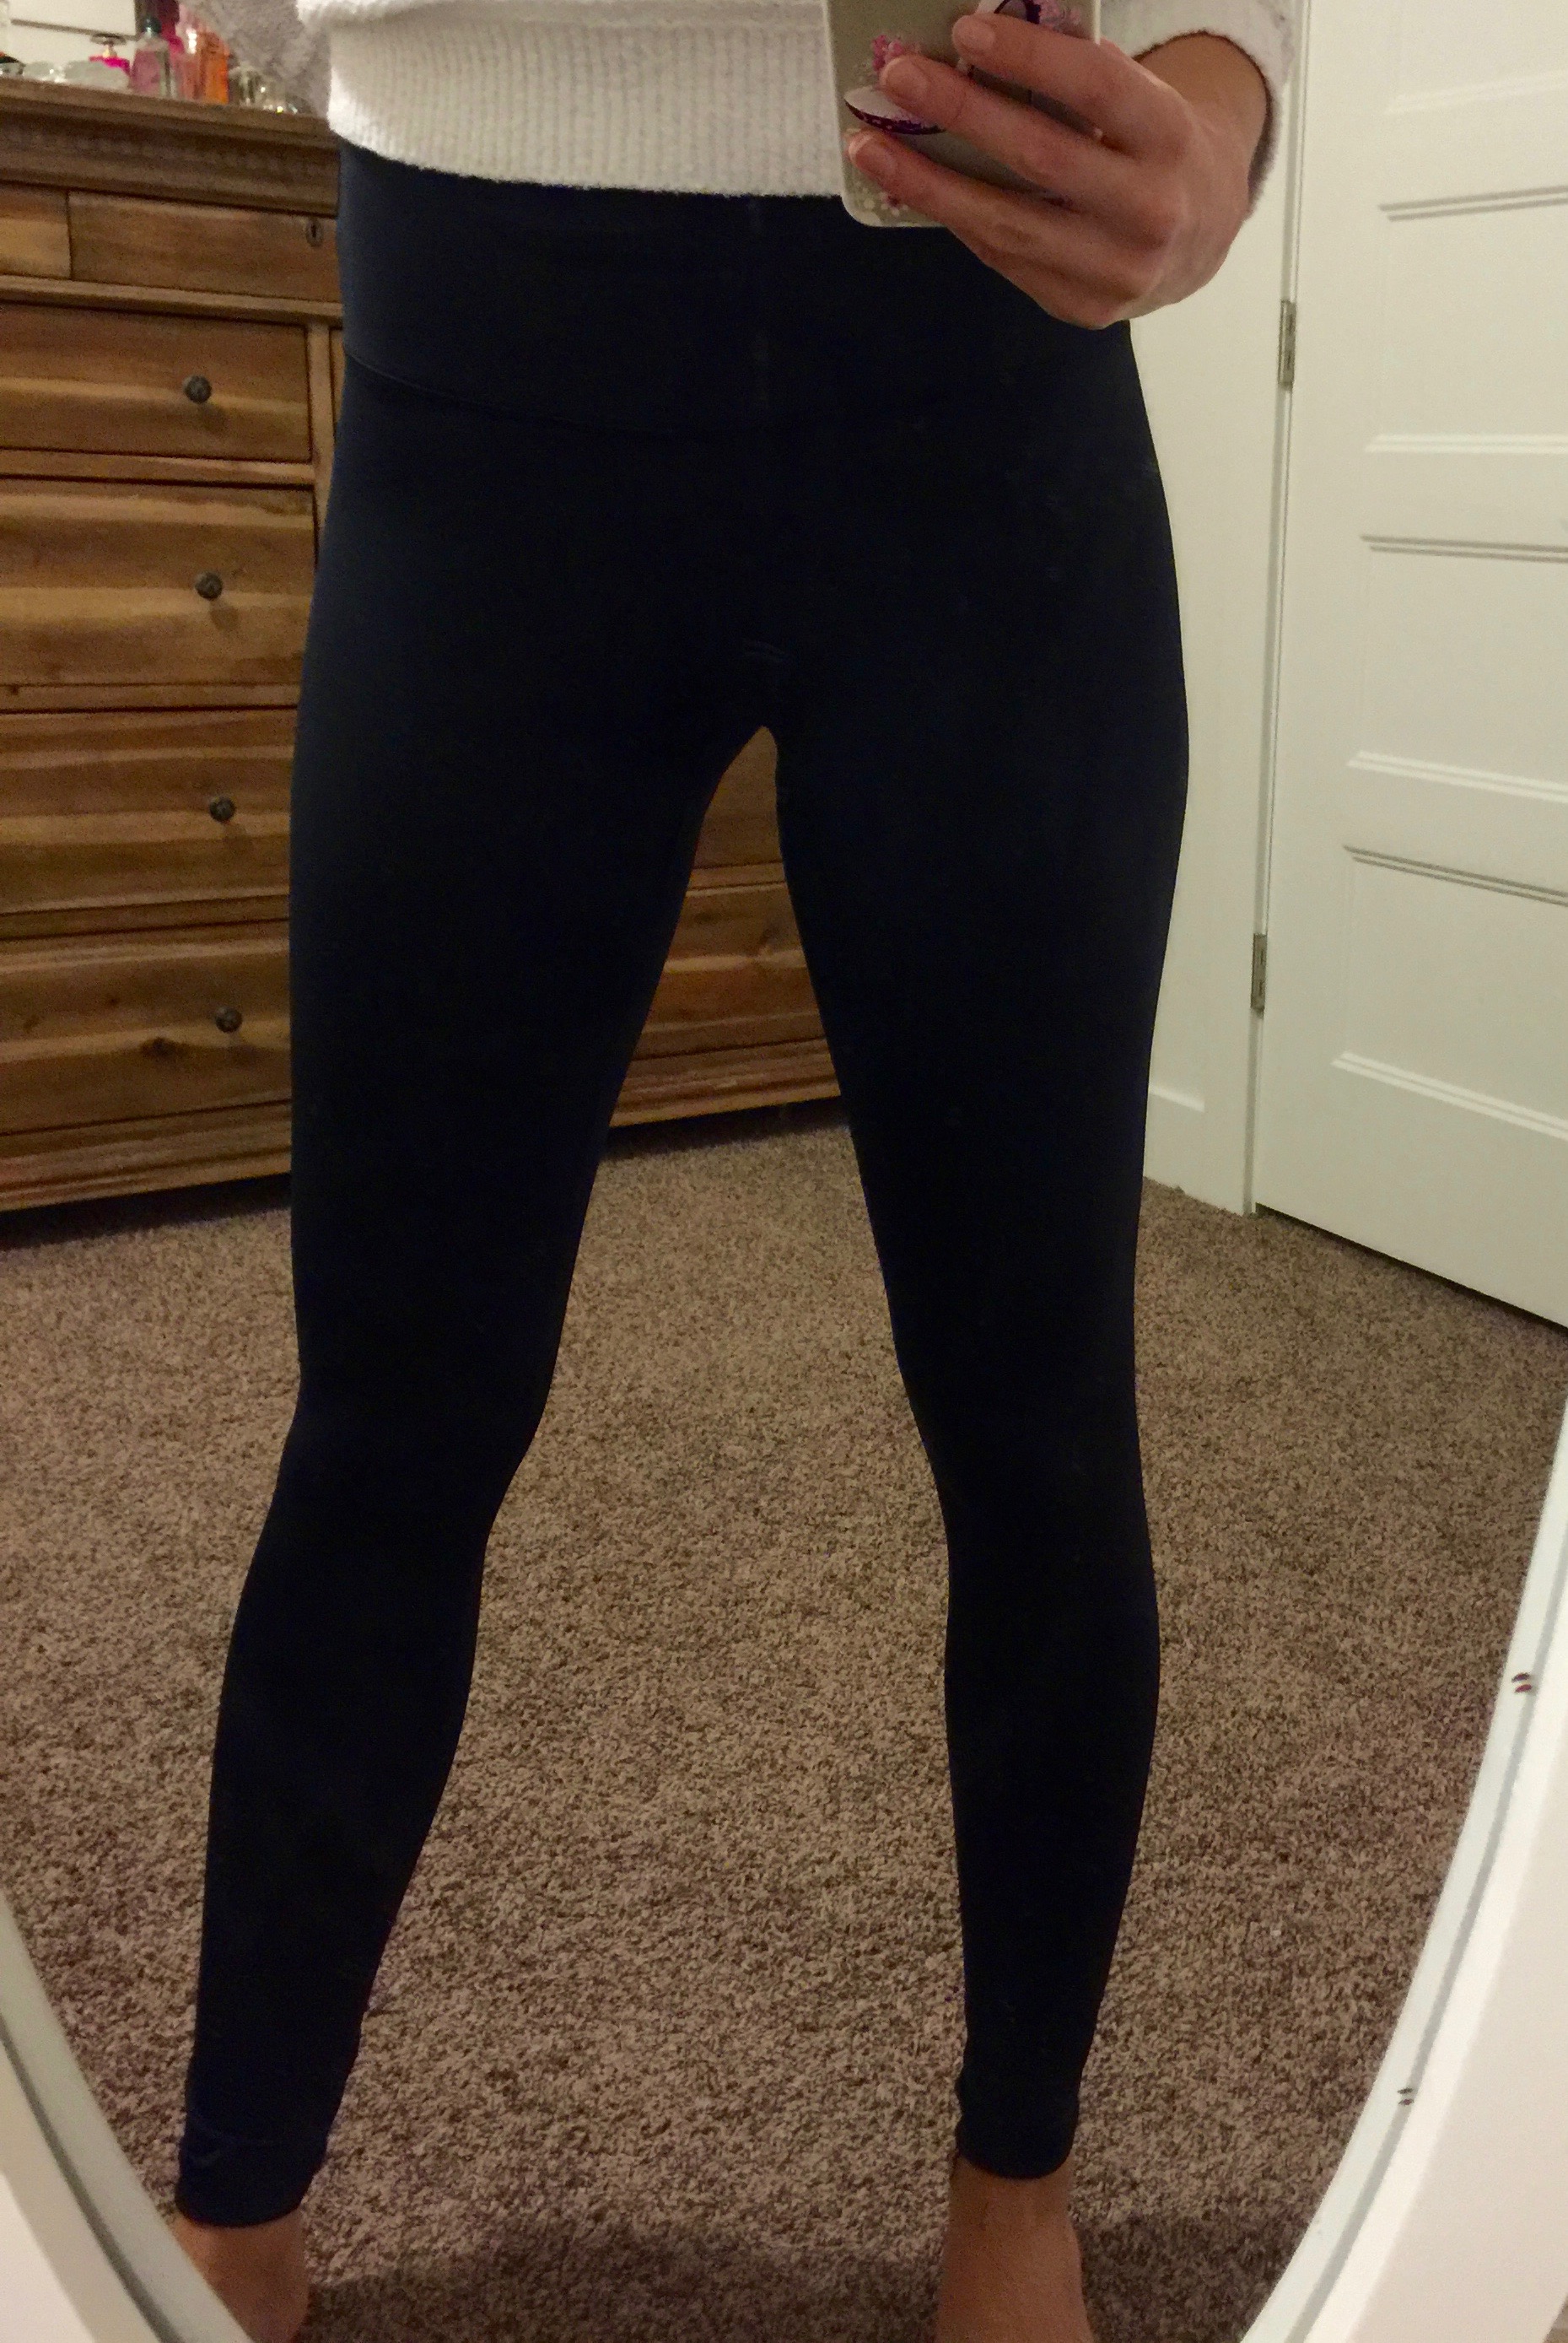 A Fabulously Flattering Yoga Pant that Stores Your Phone, Keys, and